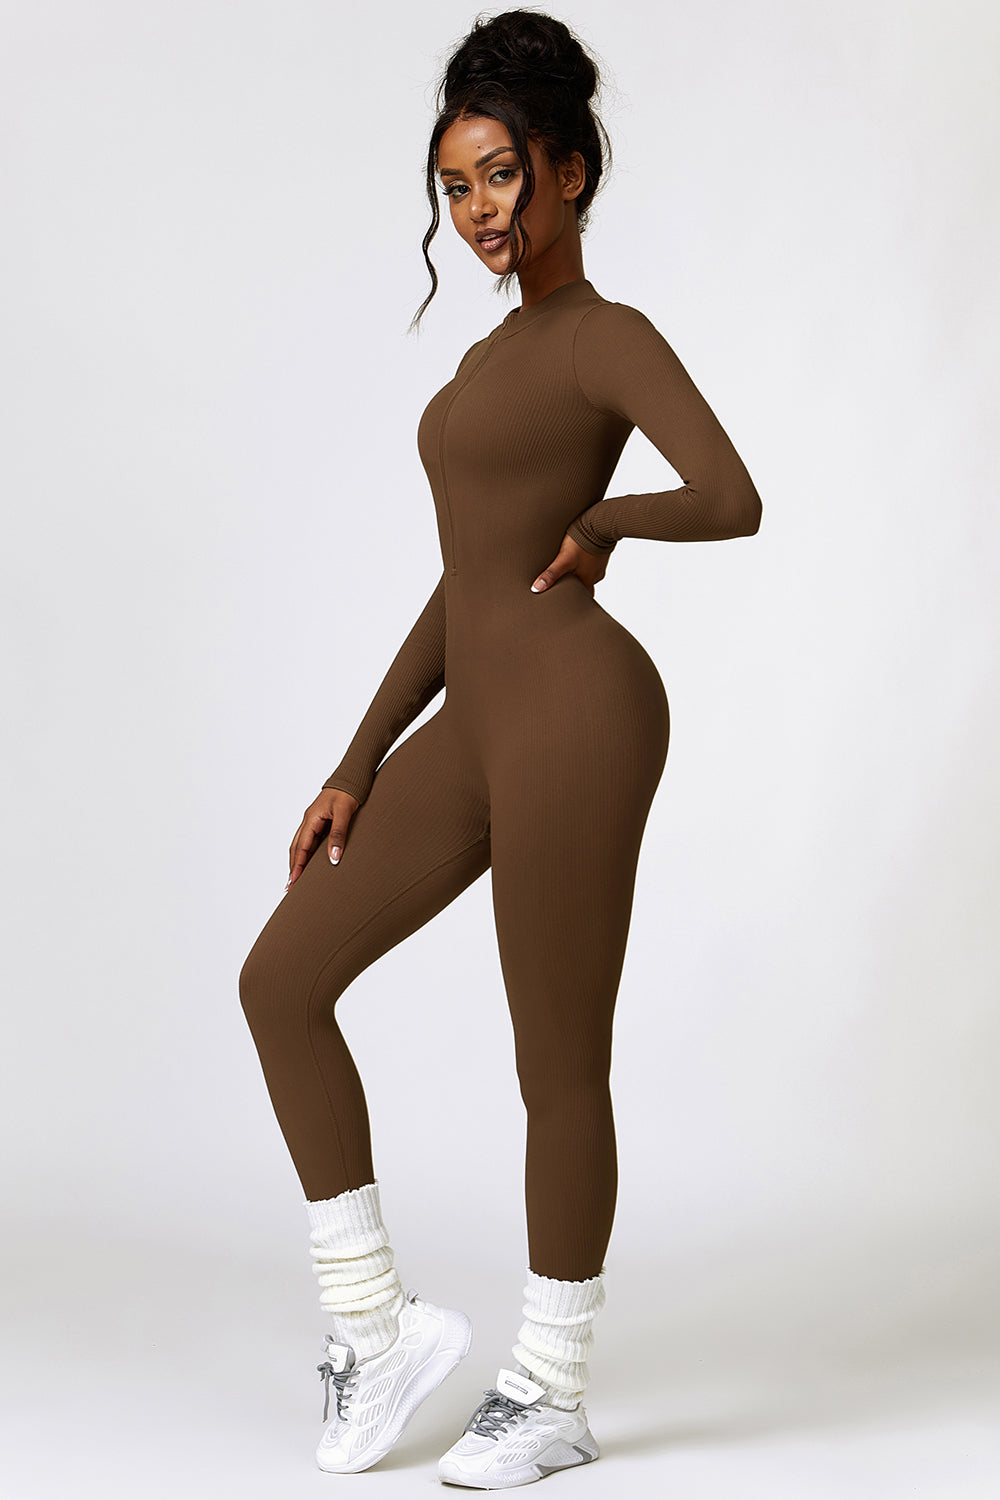 a woman in a brown bodysuit posing for a picture